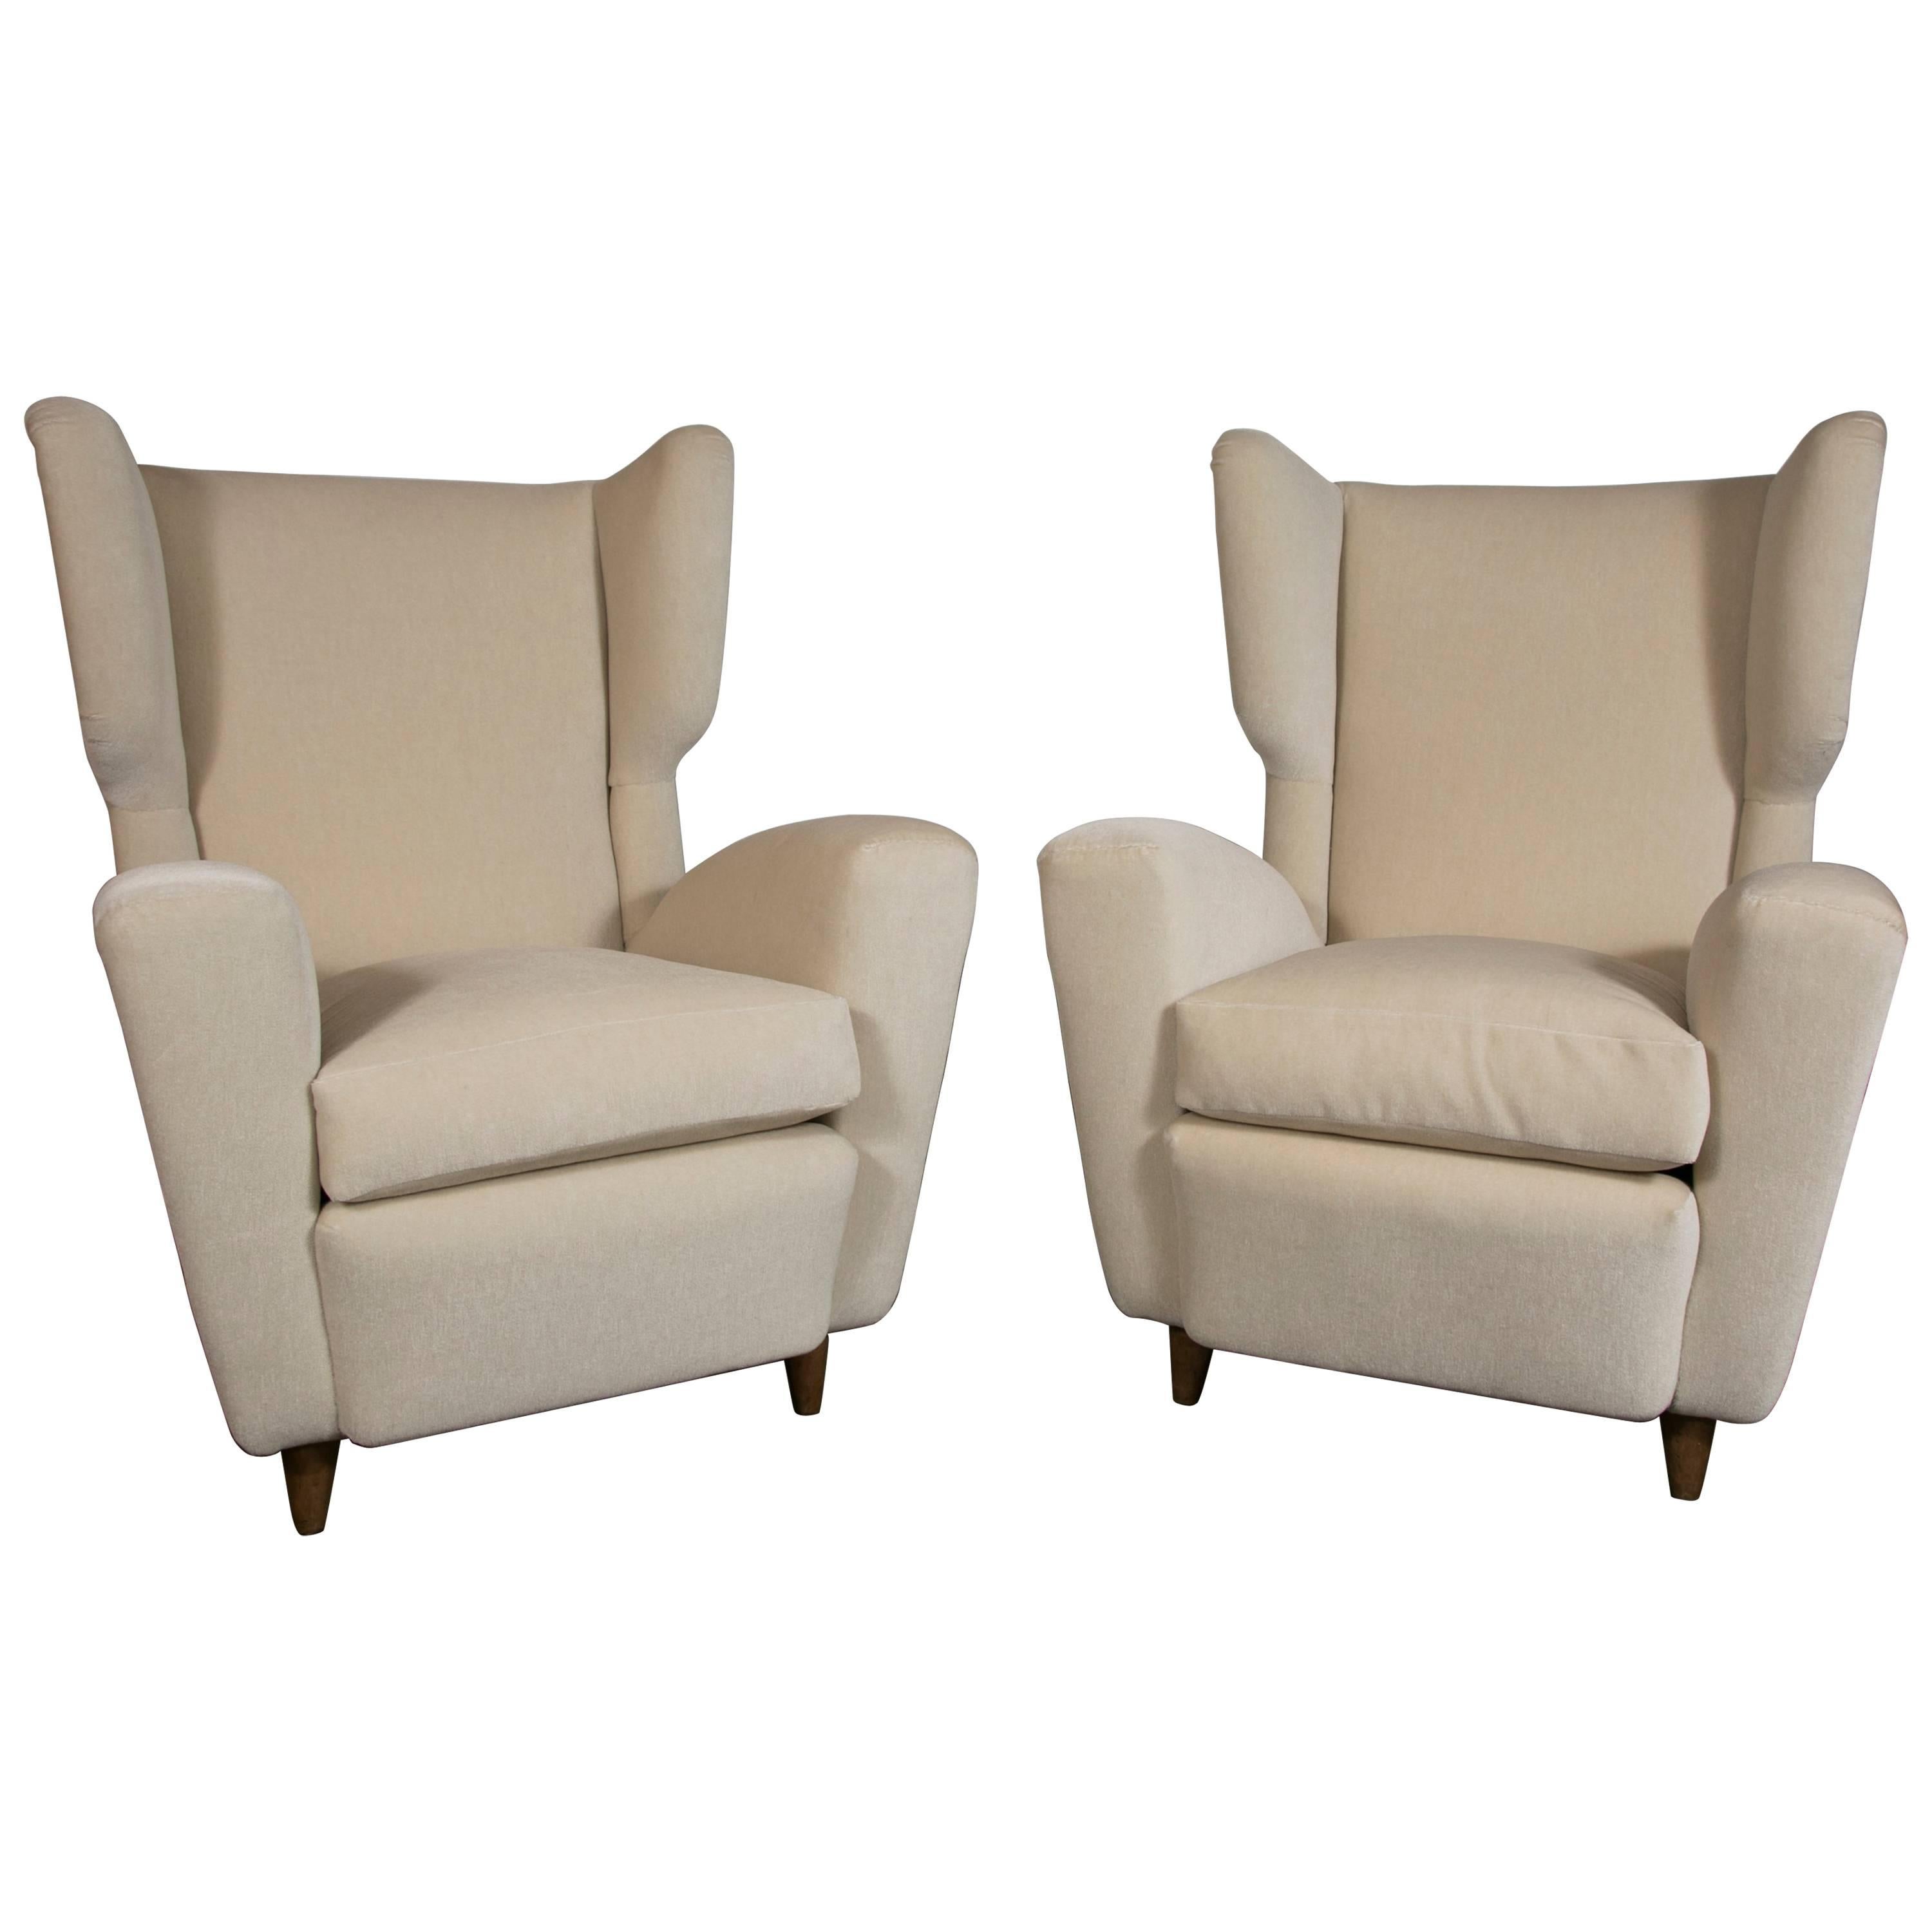 Pair of Wingback Chairs, Italy, 1950s